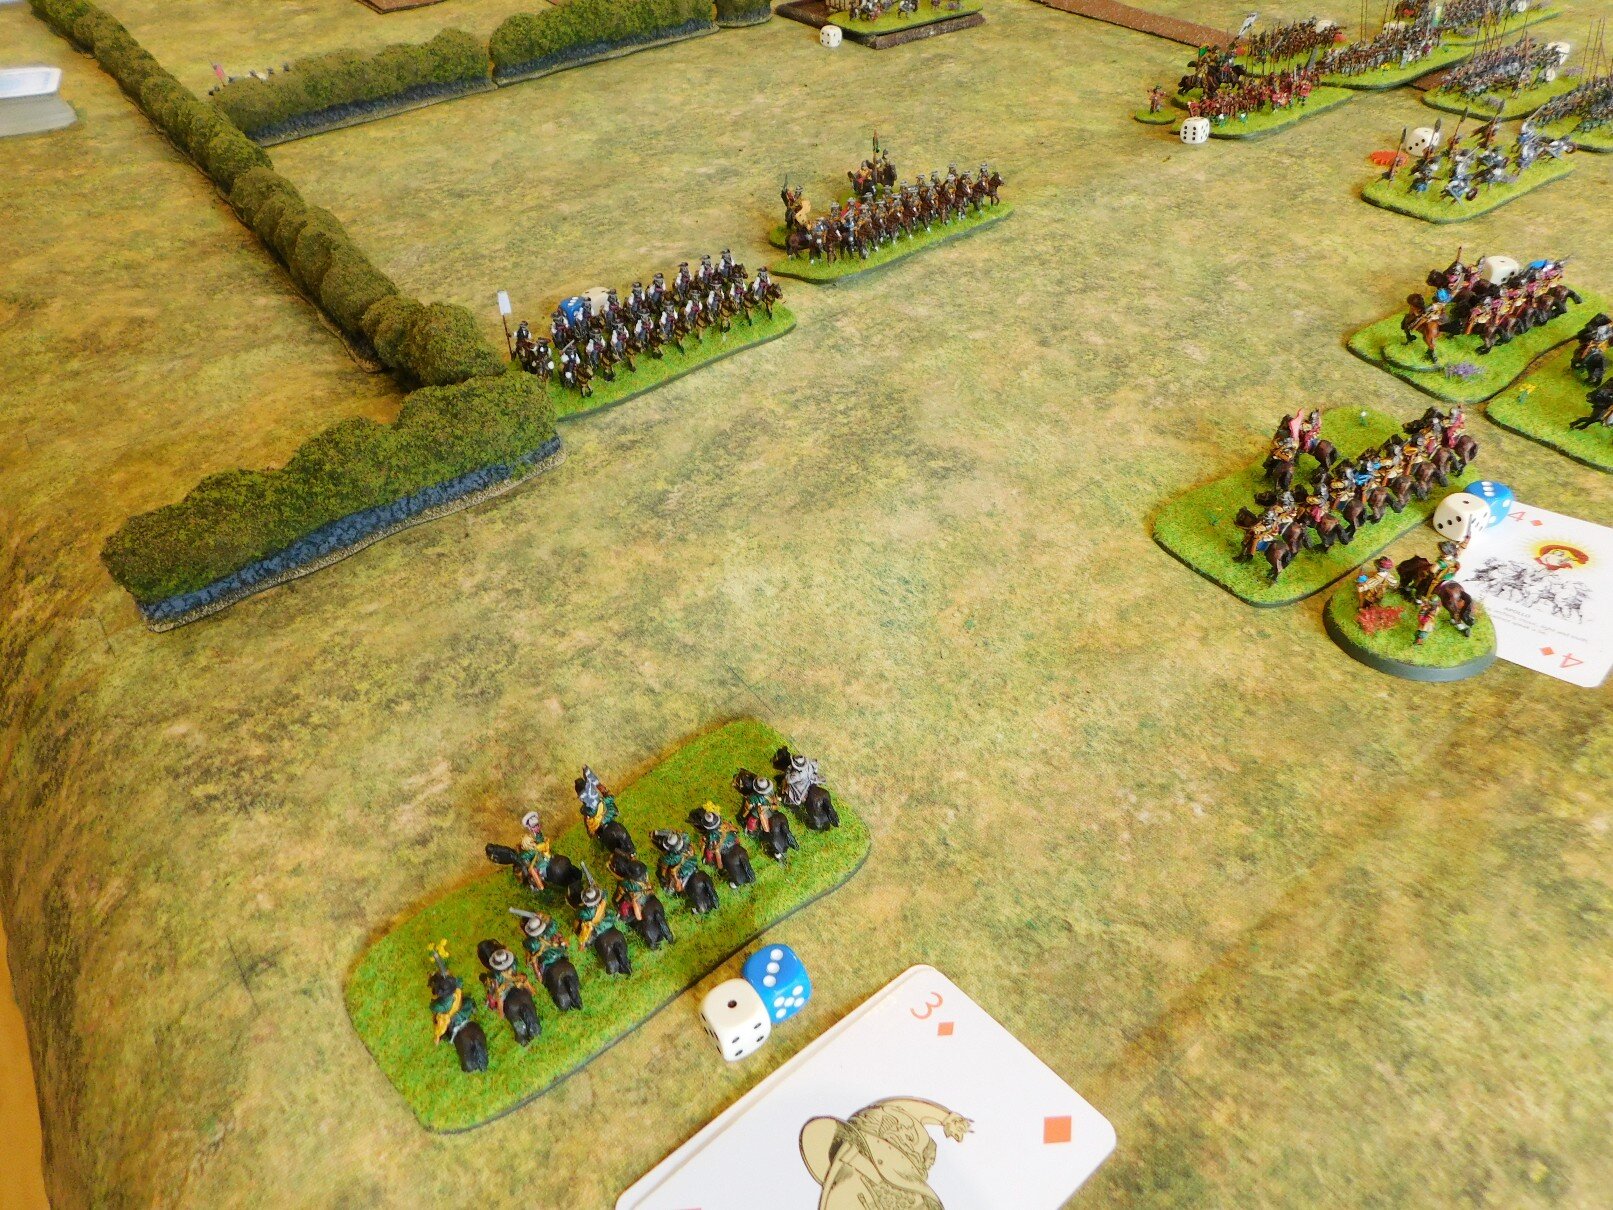 The Left Flank